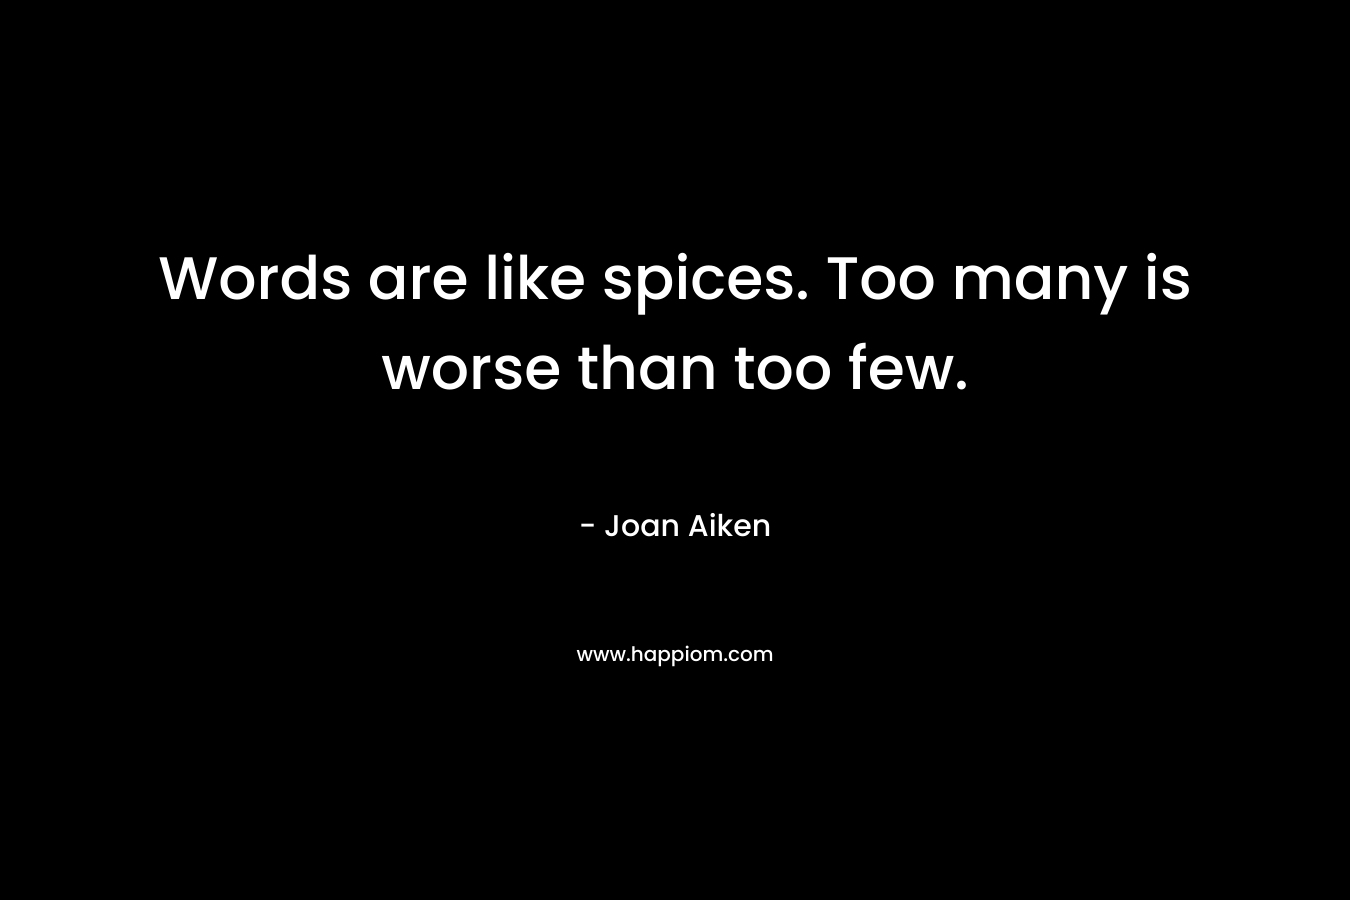 Words are like spices. Too many is worse than too few.